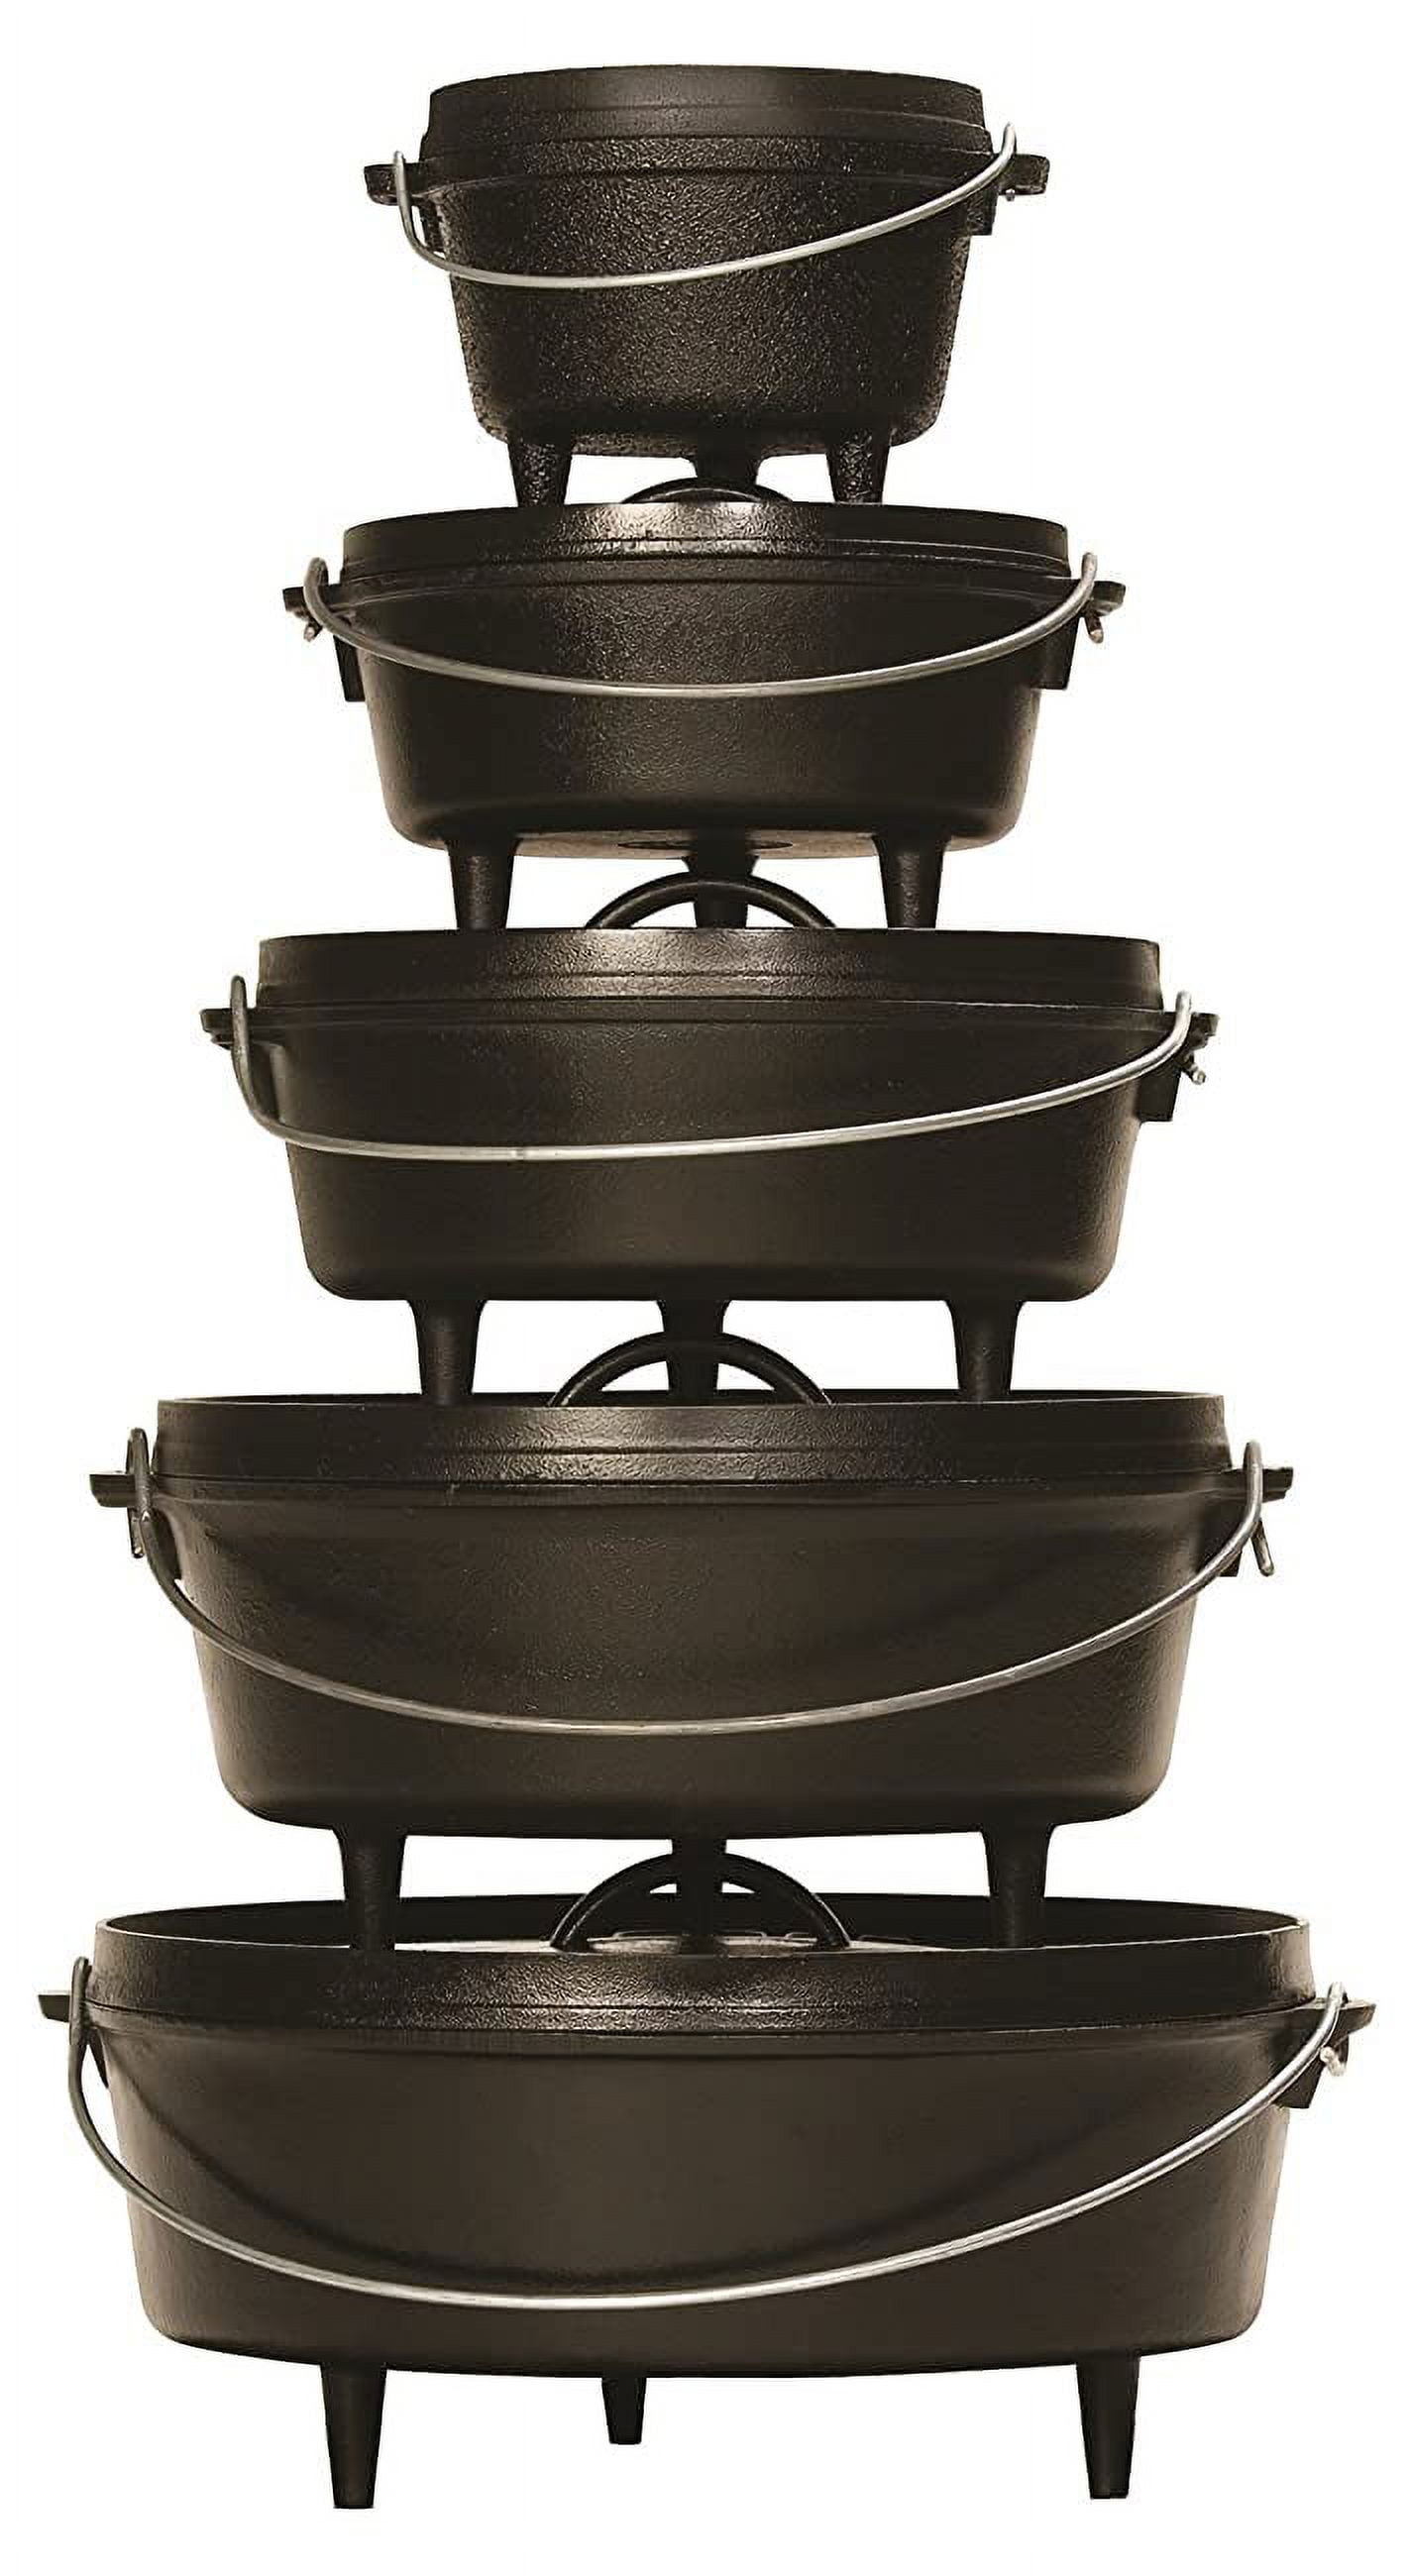  Lodge Deep Camp Dutch Oven, 10 Qt & Camp Dutch Oven Lid Lifter.  Black 9 MM Bar Stock for Lifting and Carrying Dutch Ovens. (Black Finish):  Home & Kitchen